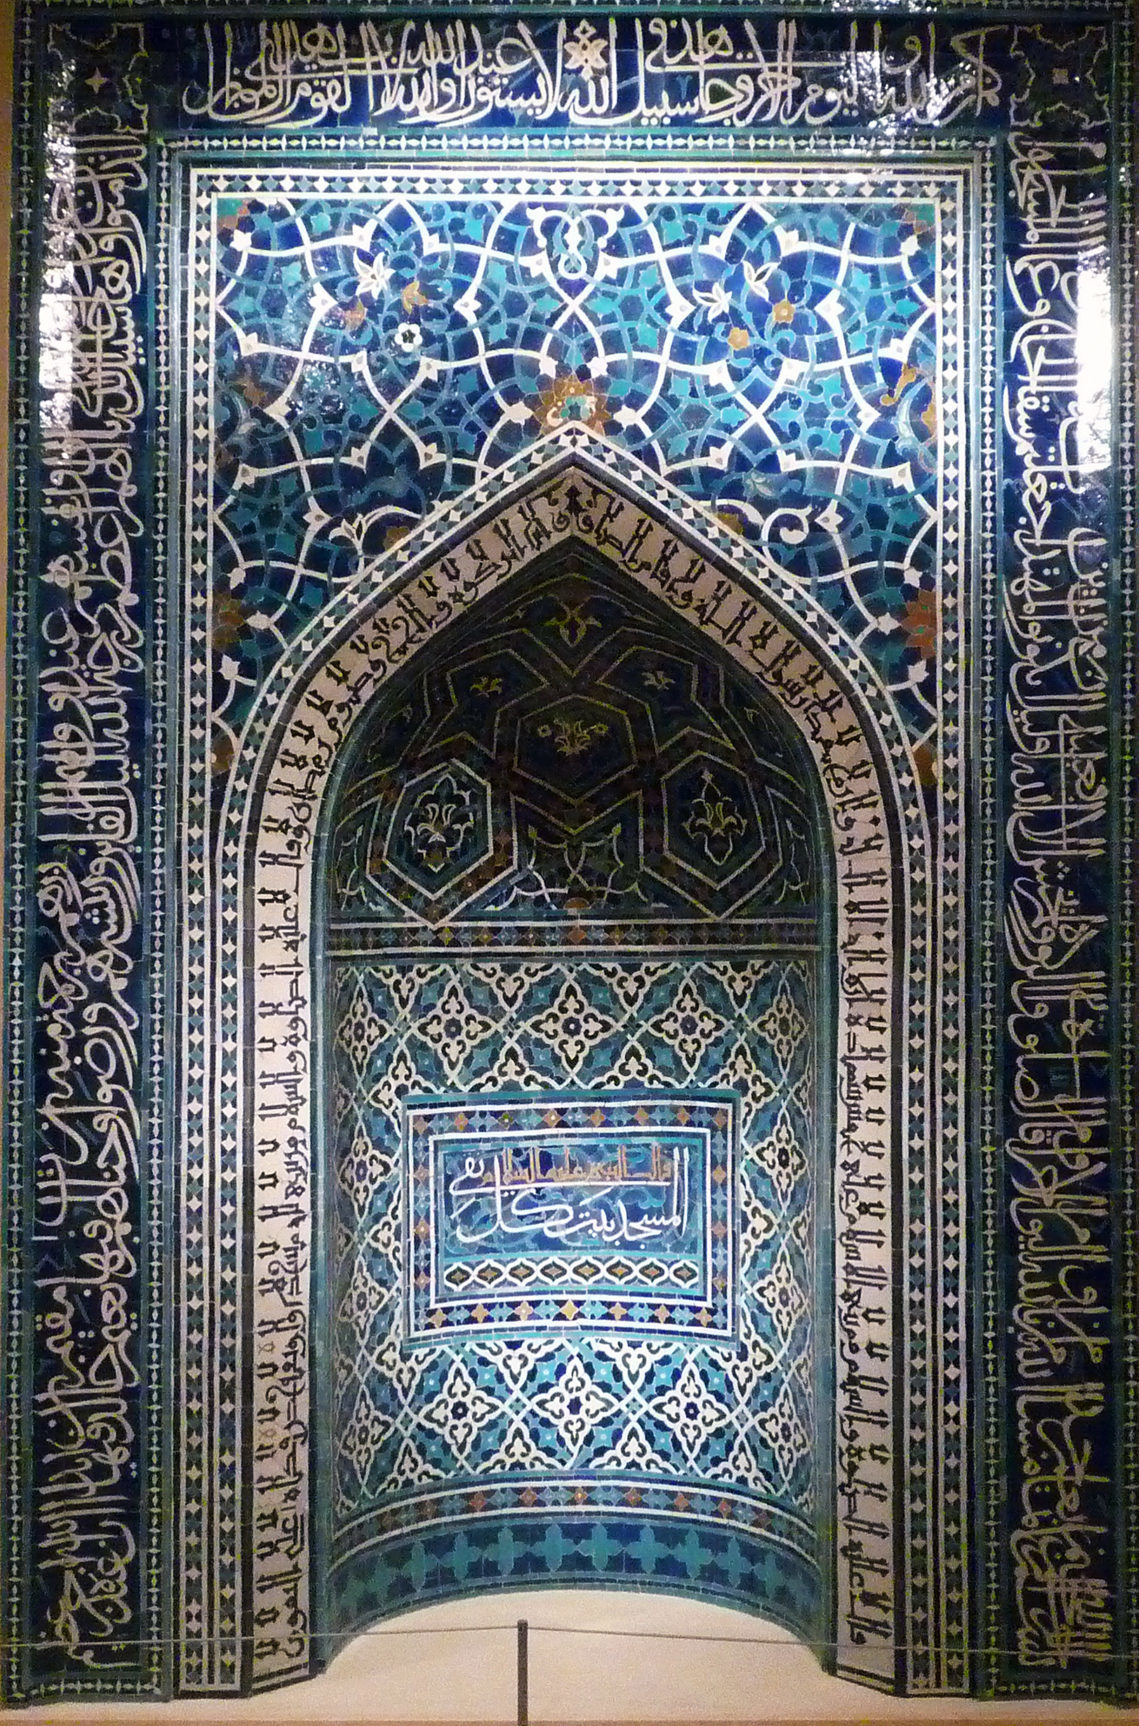 Mihrab, 1354–55, just after the Ilkhanid period, Madrasa Imami, Isfahan, Iran, polychrome glazed tiles, 343.1 x 288.7 cm (Metropolitan Museum of Art)